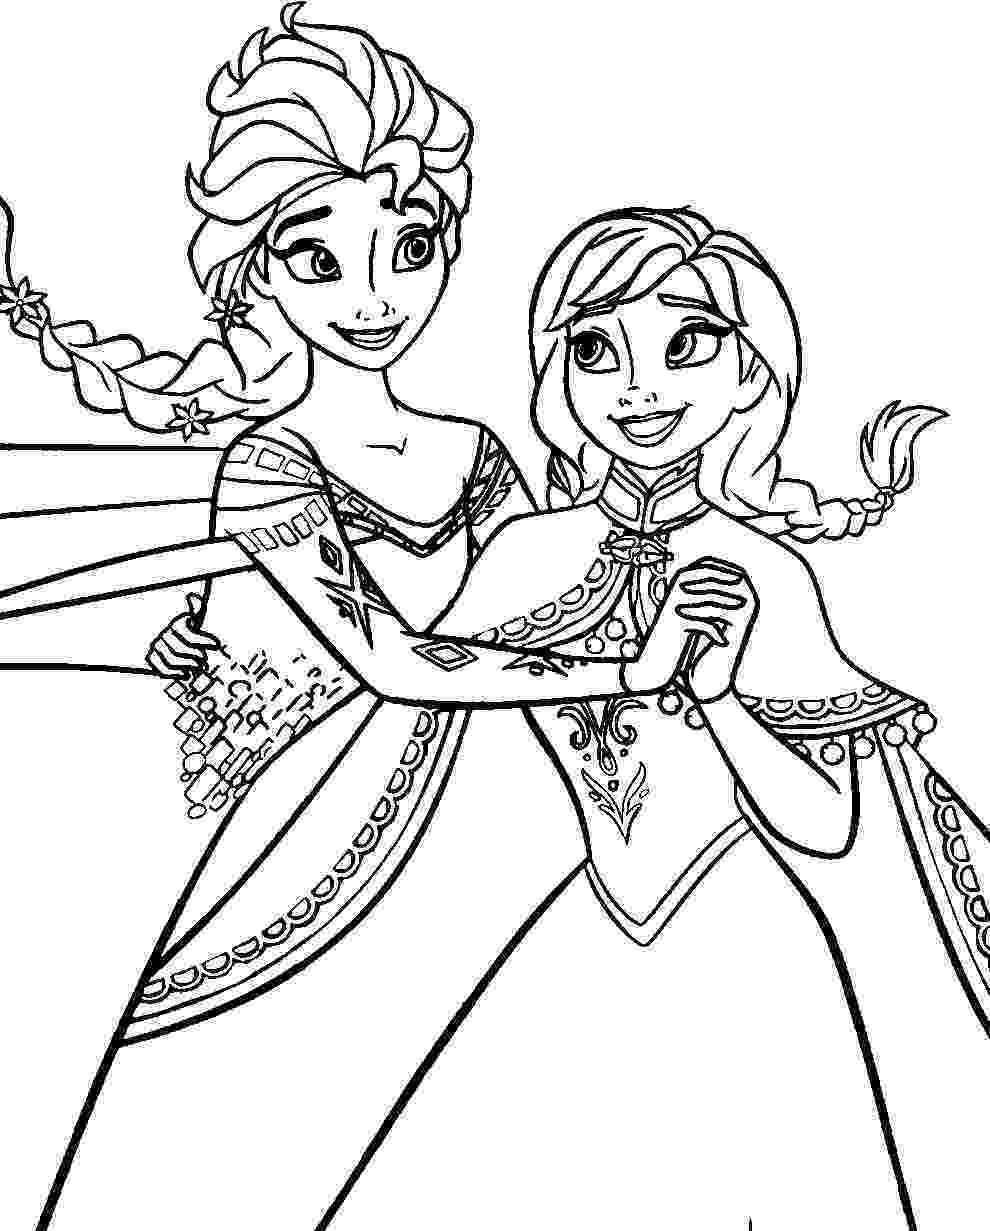 frozen printable colouring pages free frozen printable coloring activity pages plus free printable colouring pages frozen 